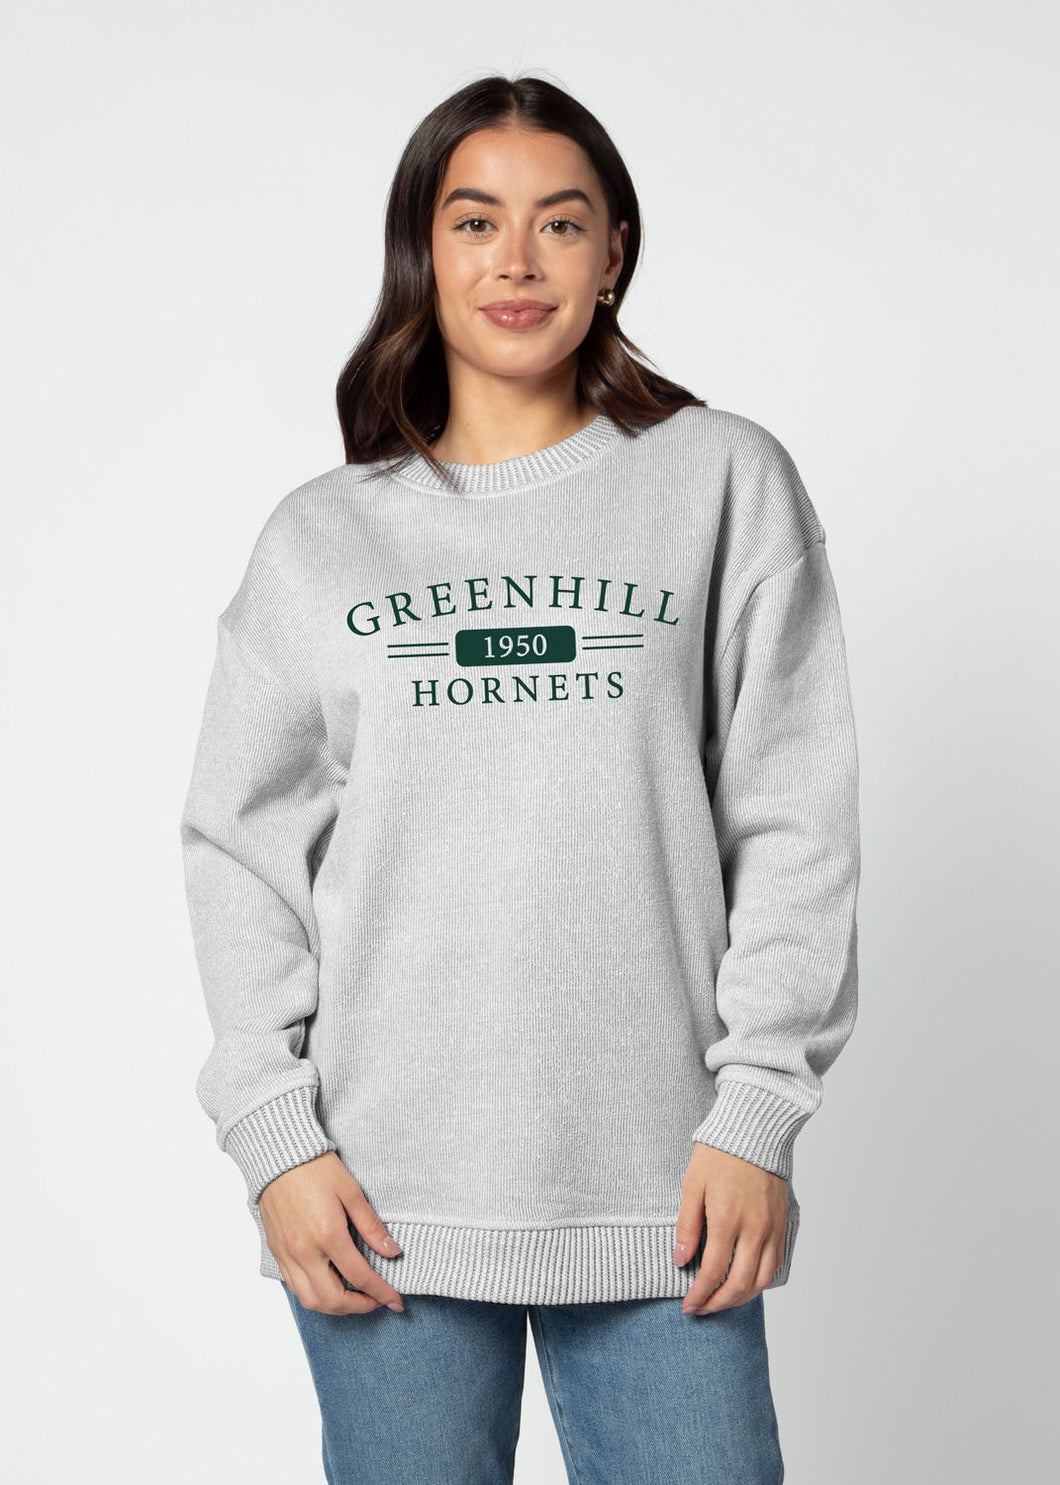 Greenhill Chicka-D Womens Serif Arch Warm Up Crew